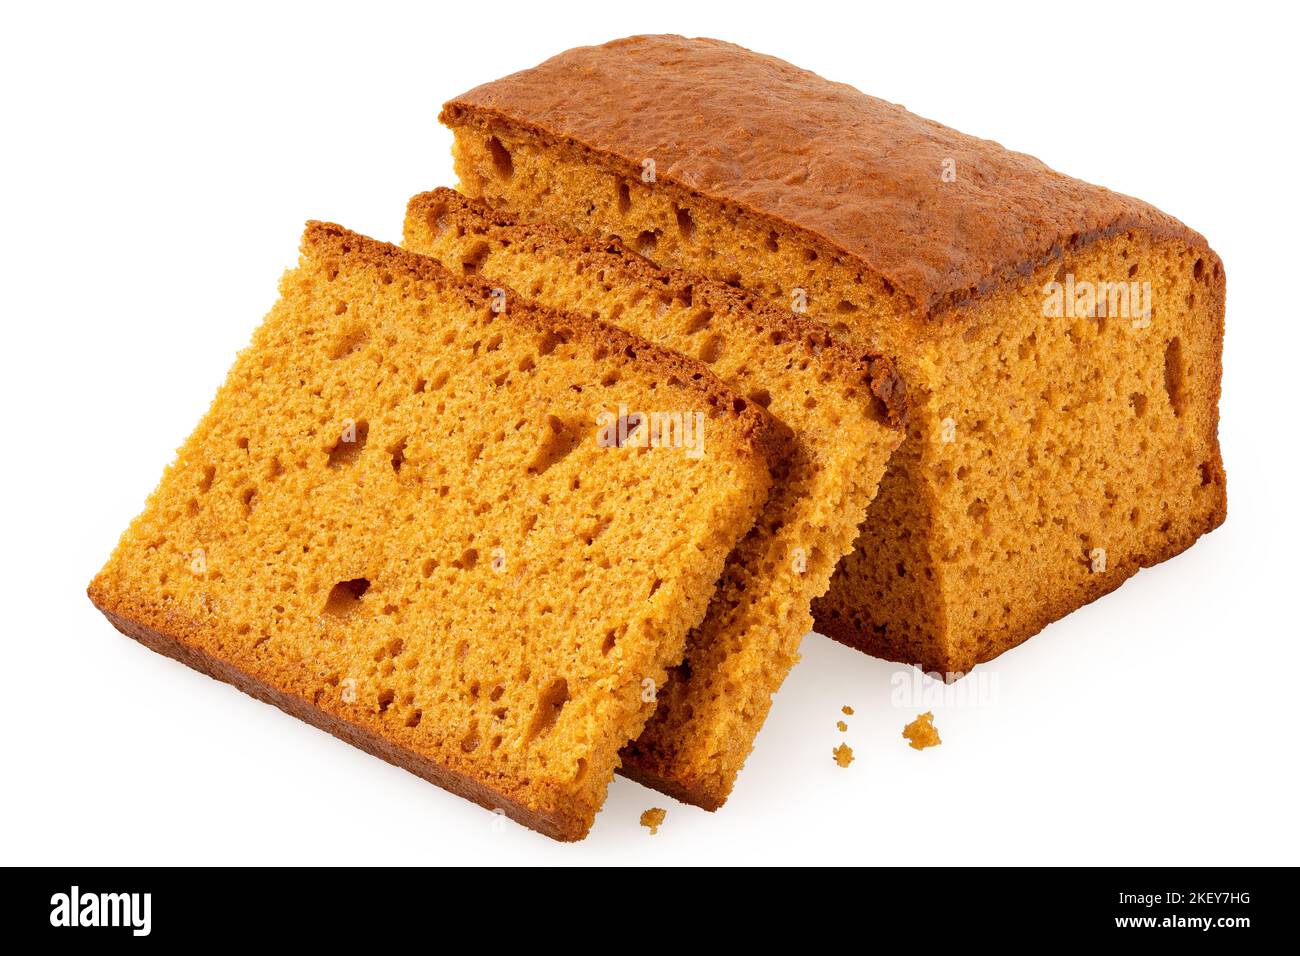 Two slices of spiced honey cake next to a loaf of honey cake isolated on white. Stock Photo